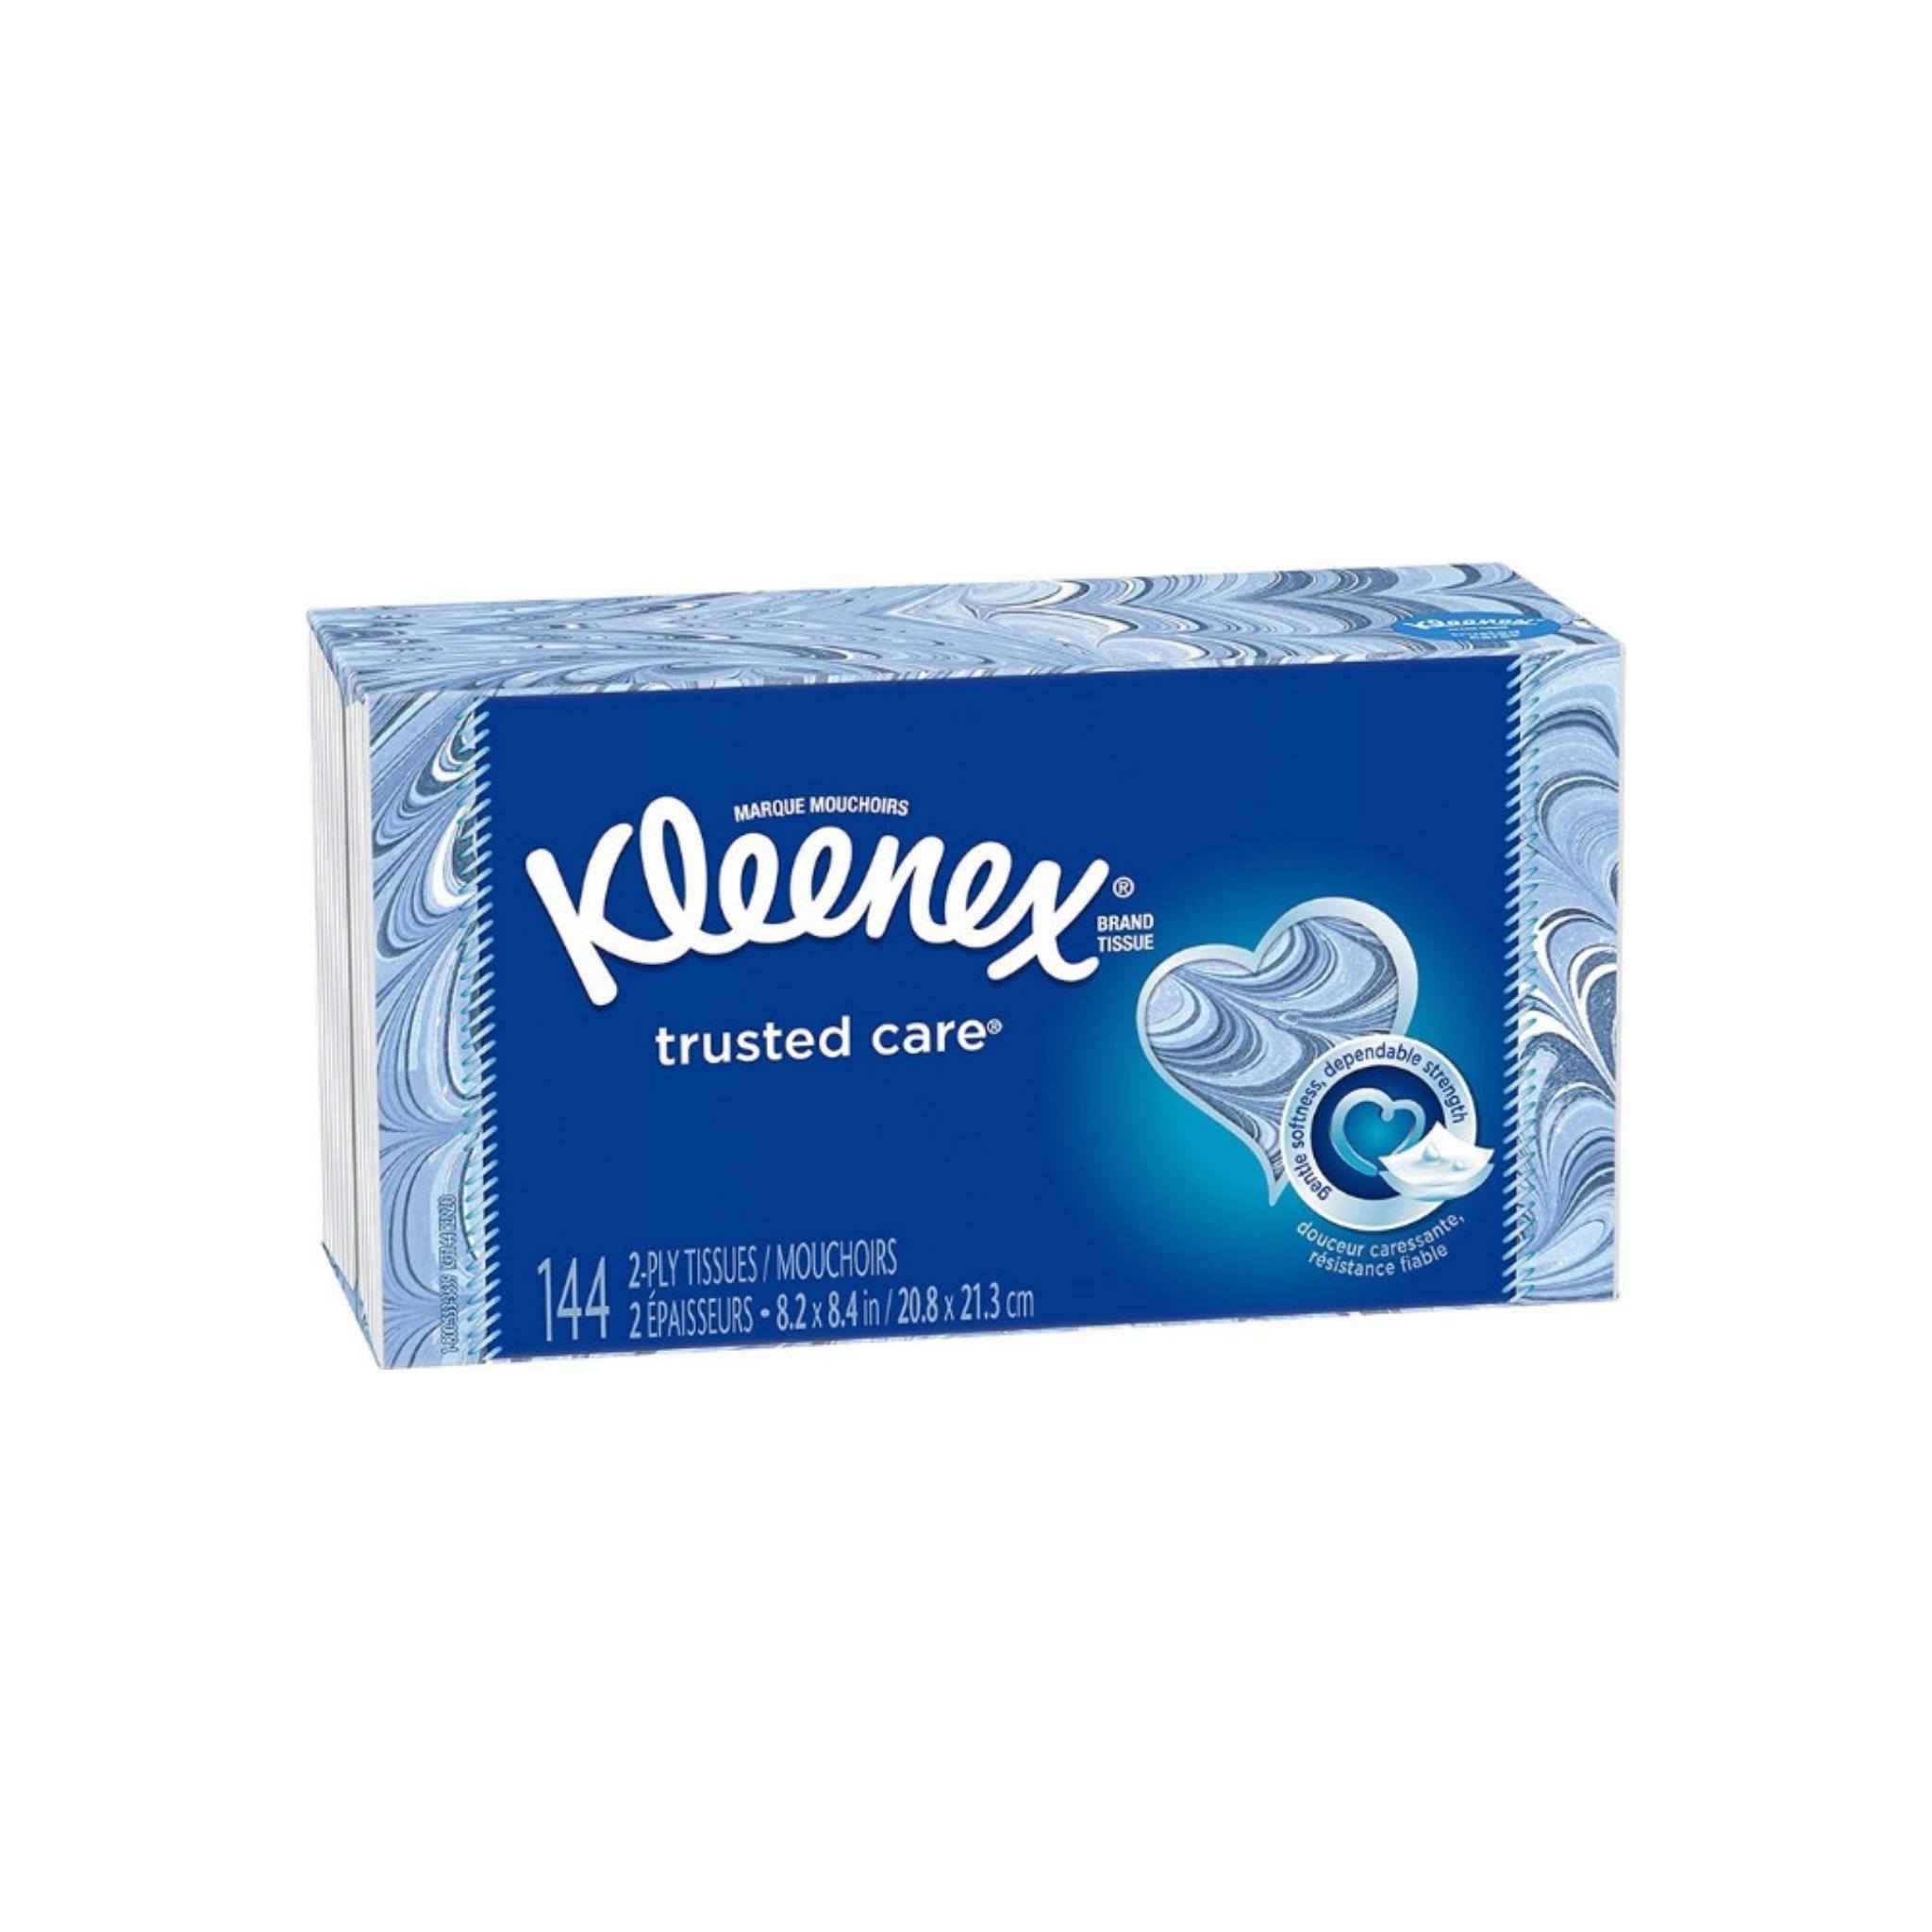 Kleenex Trusted Care Facial Tissues, 144 Count | Household Supplies | Best Price Guarantee | 30 Day Money Back Guarantee | Delivery guaranteed